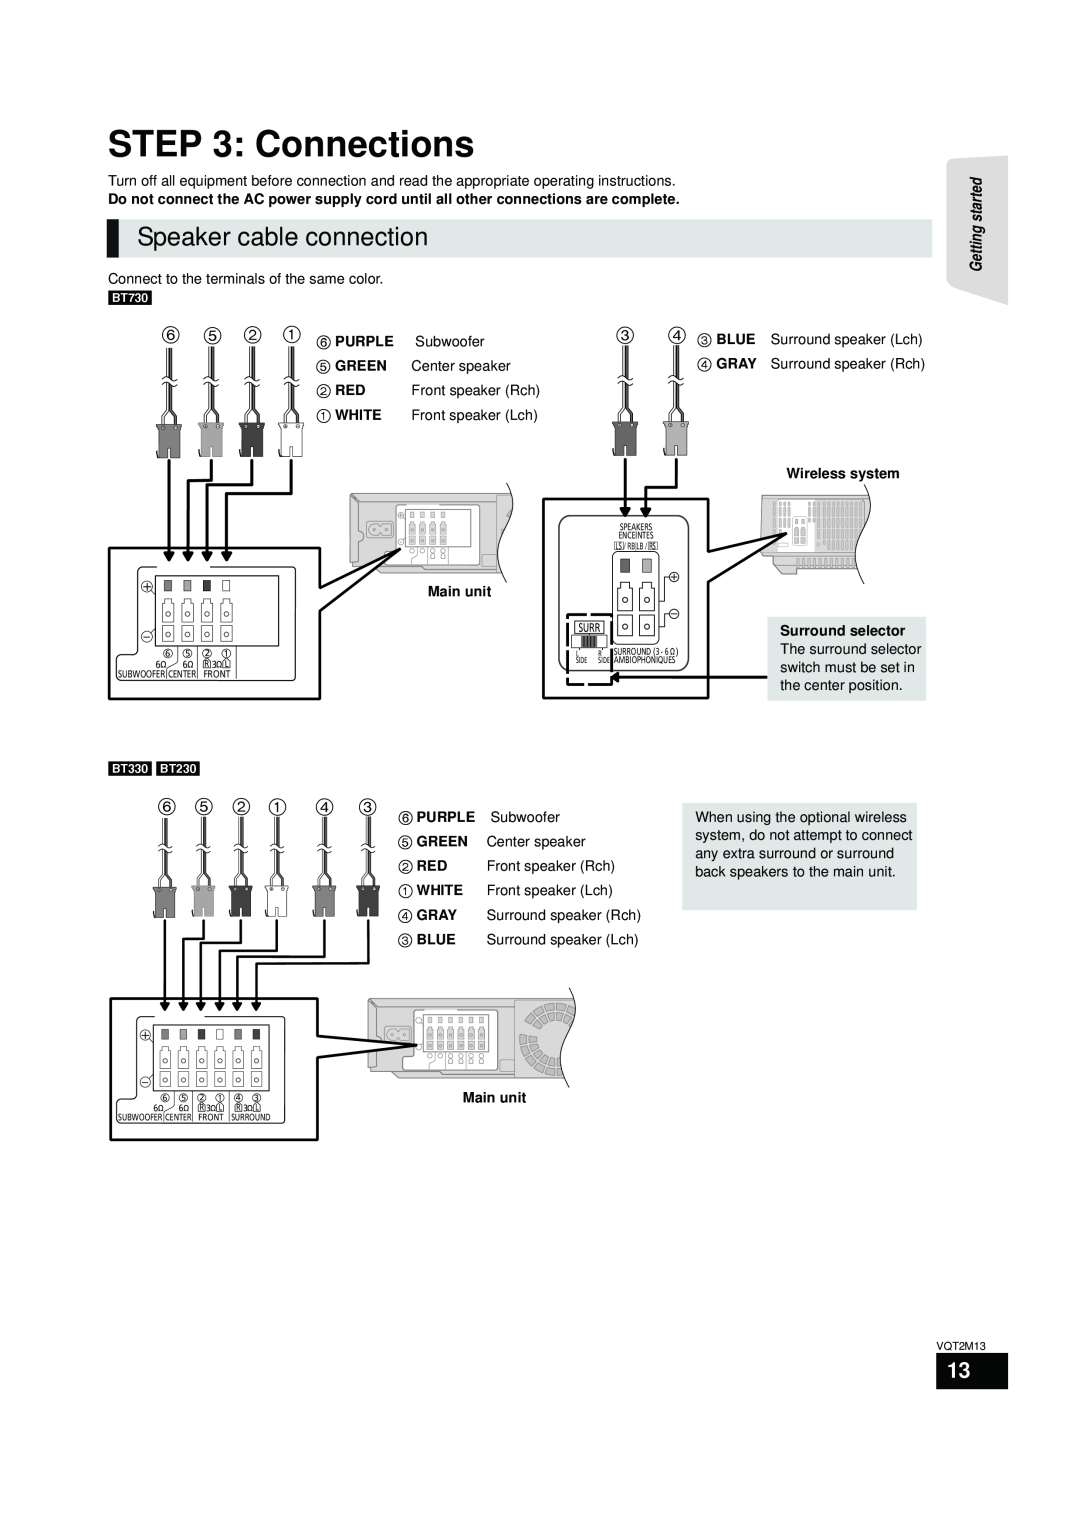 Panasonic SC-BT330, SC-BT730 operating instructions Connections, Speaker cable connection 